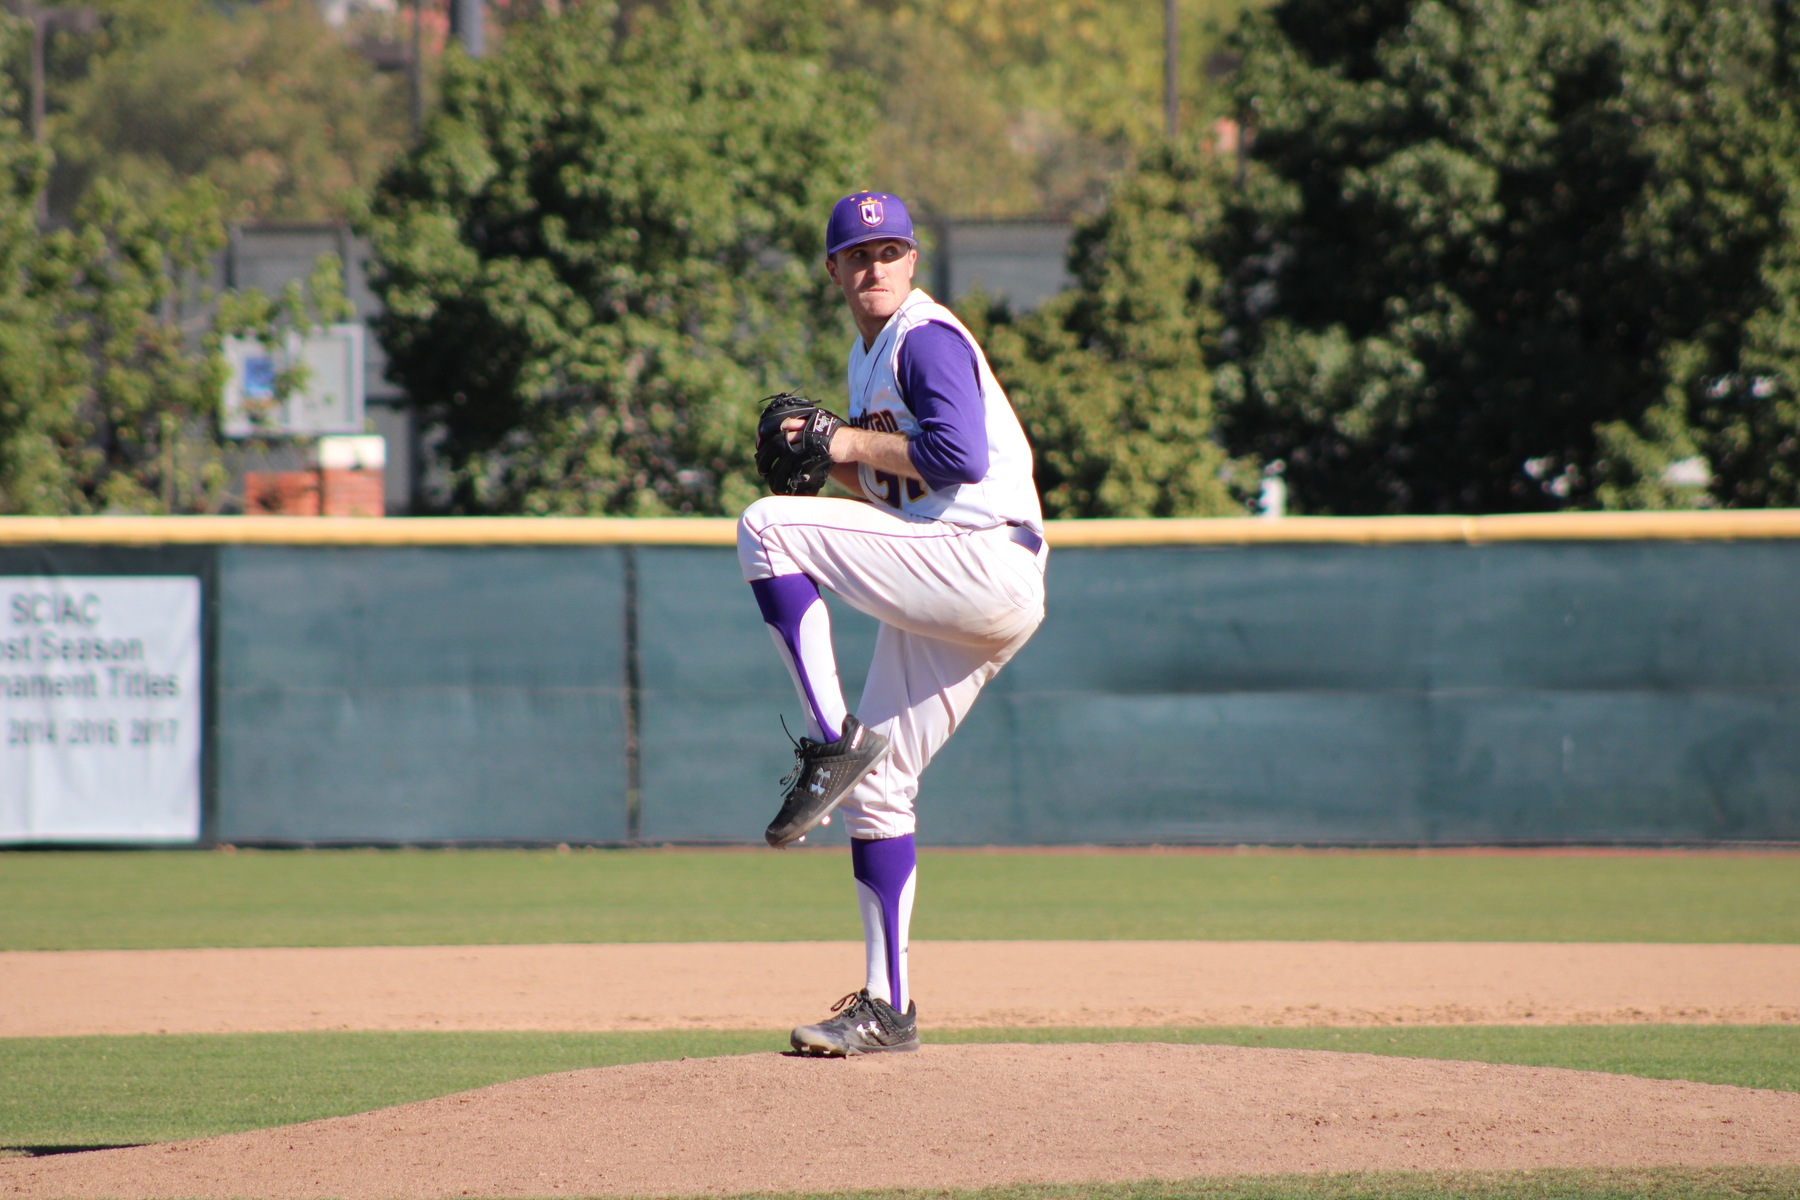 Christian Slattery picked up his sixth save of the season in Cal Lutheran's 8-5 win over Redlands. The senior leads the nation in saves. (Photo Credit: Mariah Zermeno)